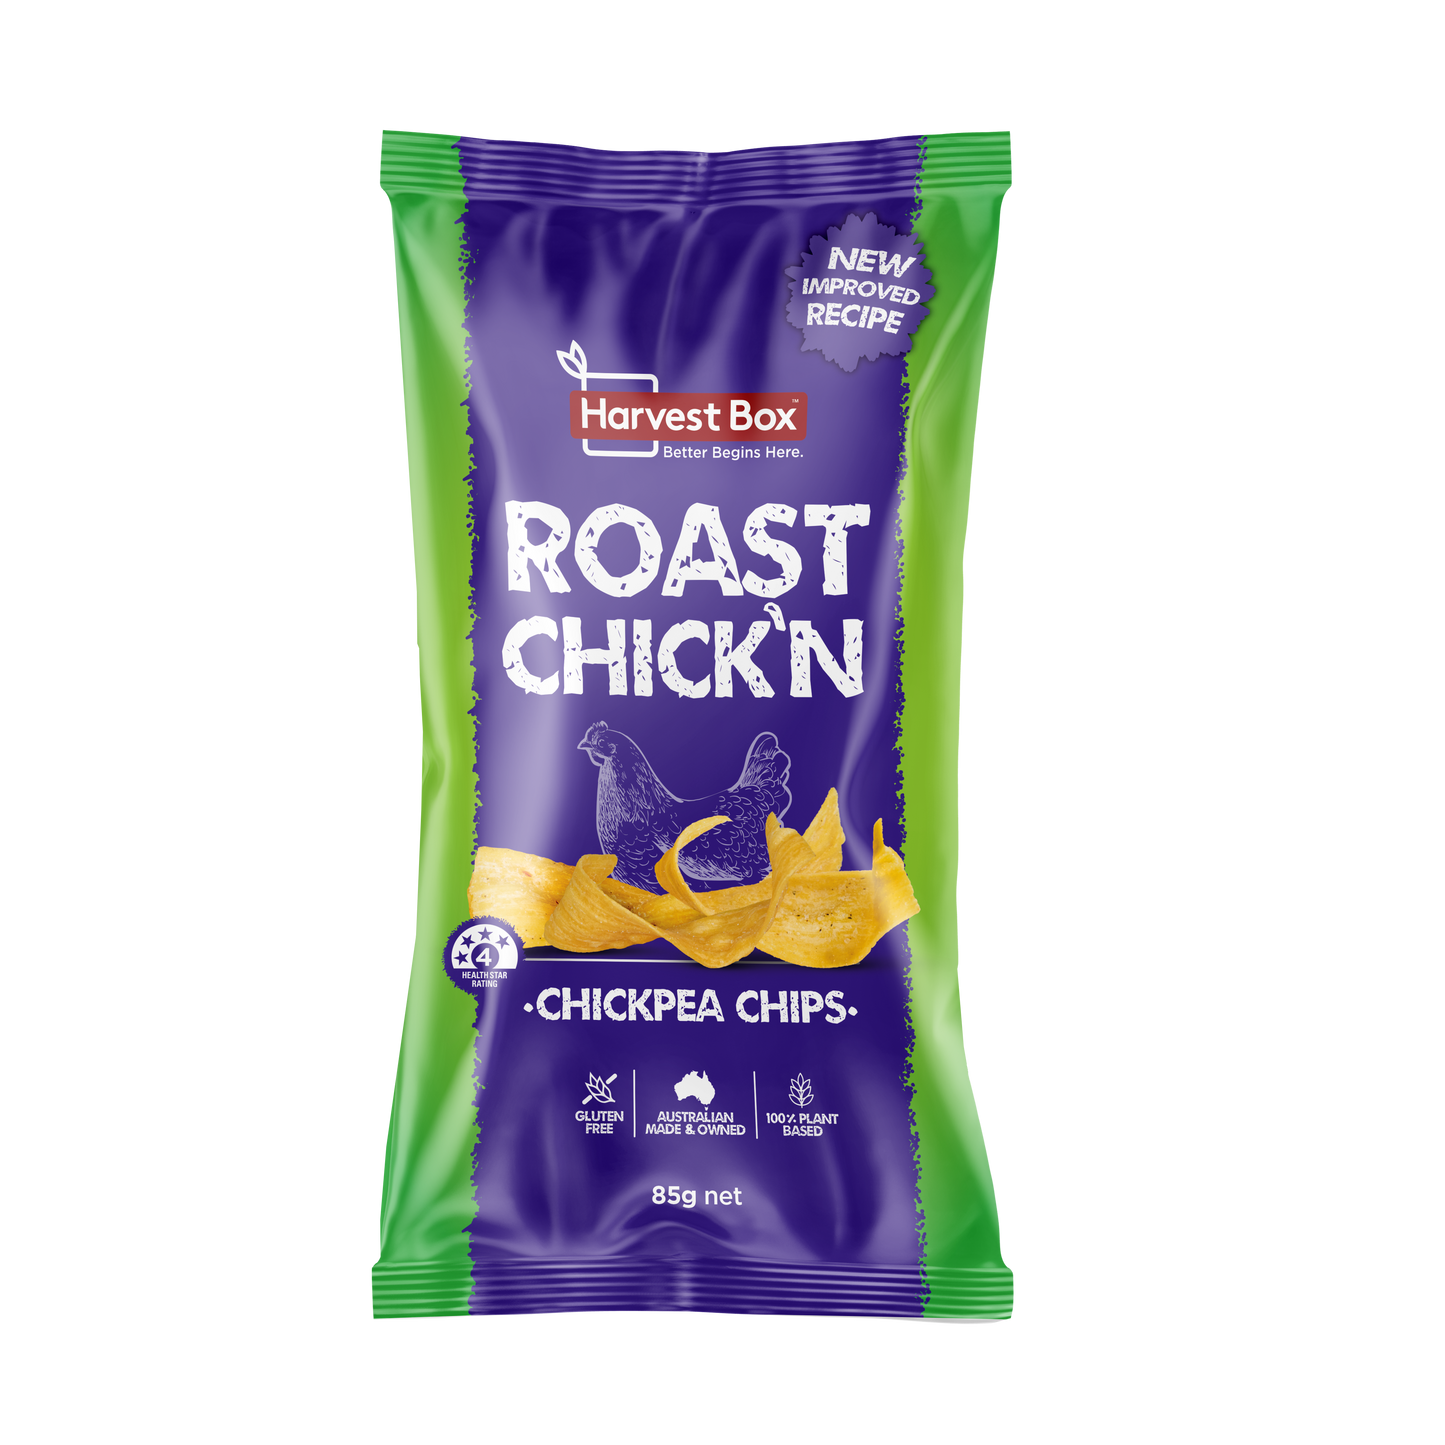 CHICKPEA CHIPS – ROAST CHICK’N